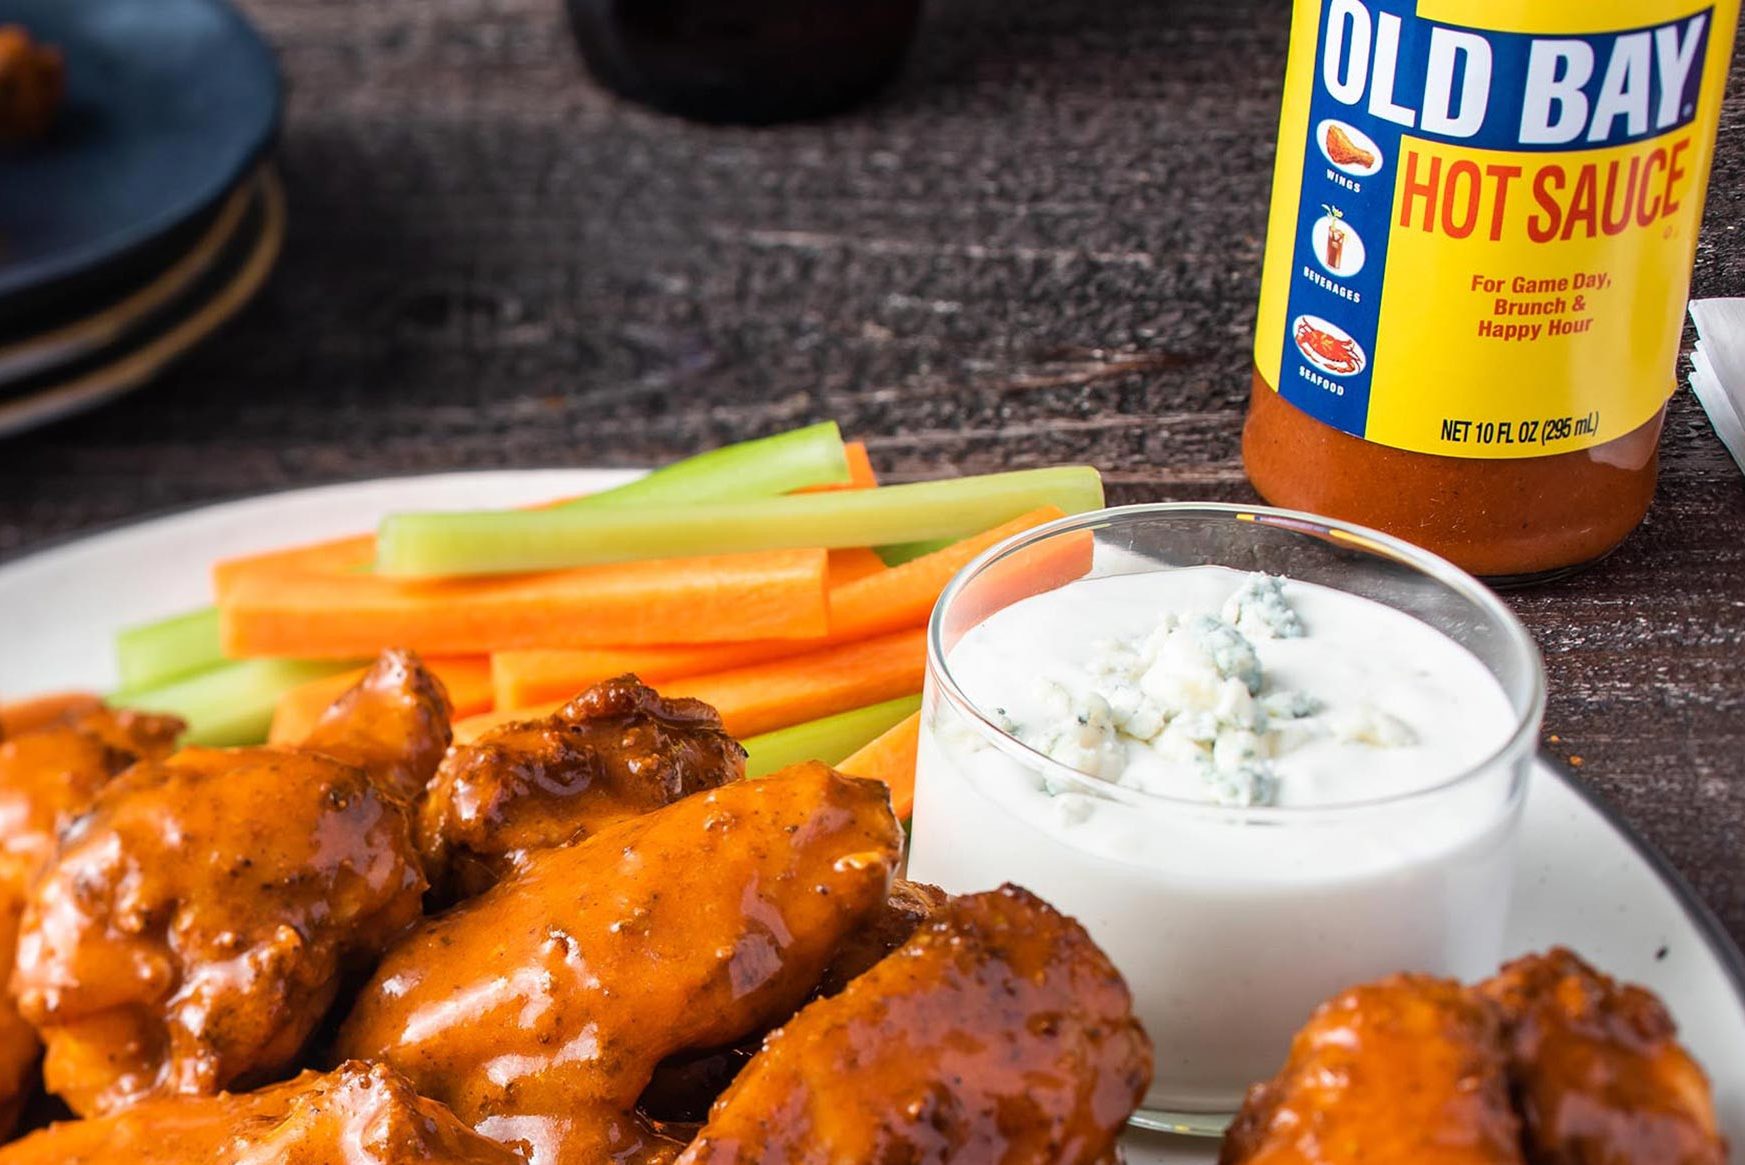 Buffalo wings made with Old Bay's hot sauce.